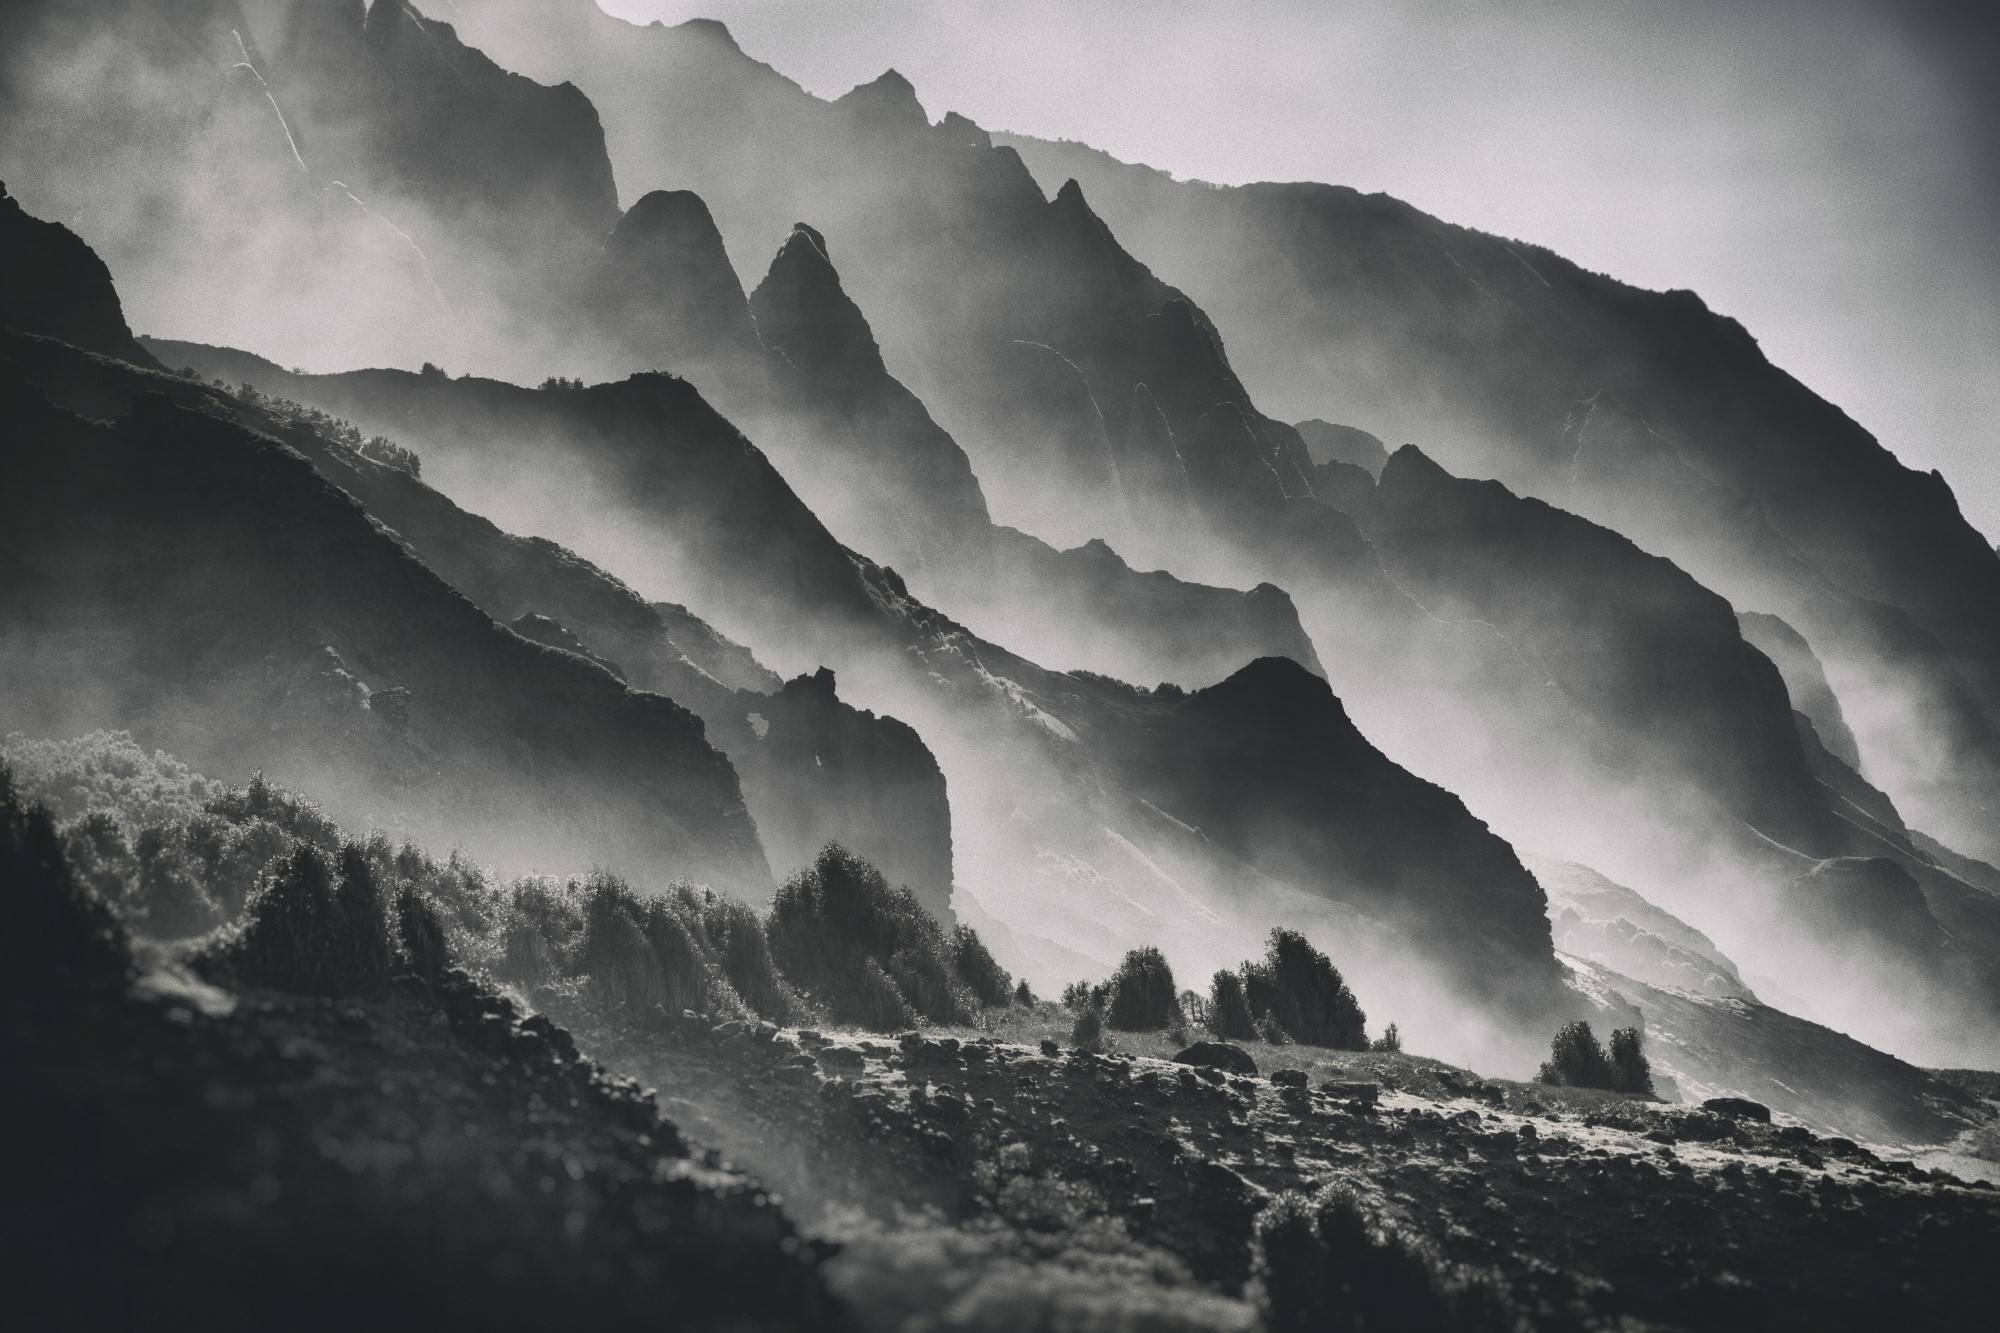 Black and white hilly landscape.